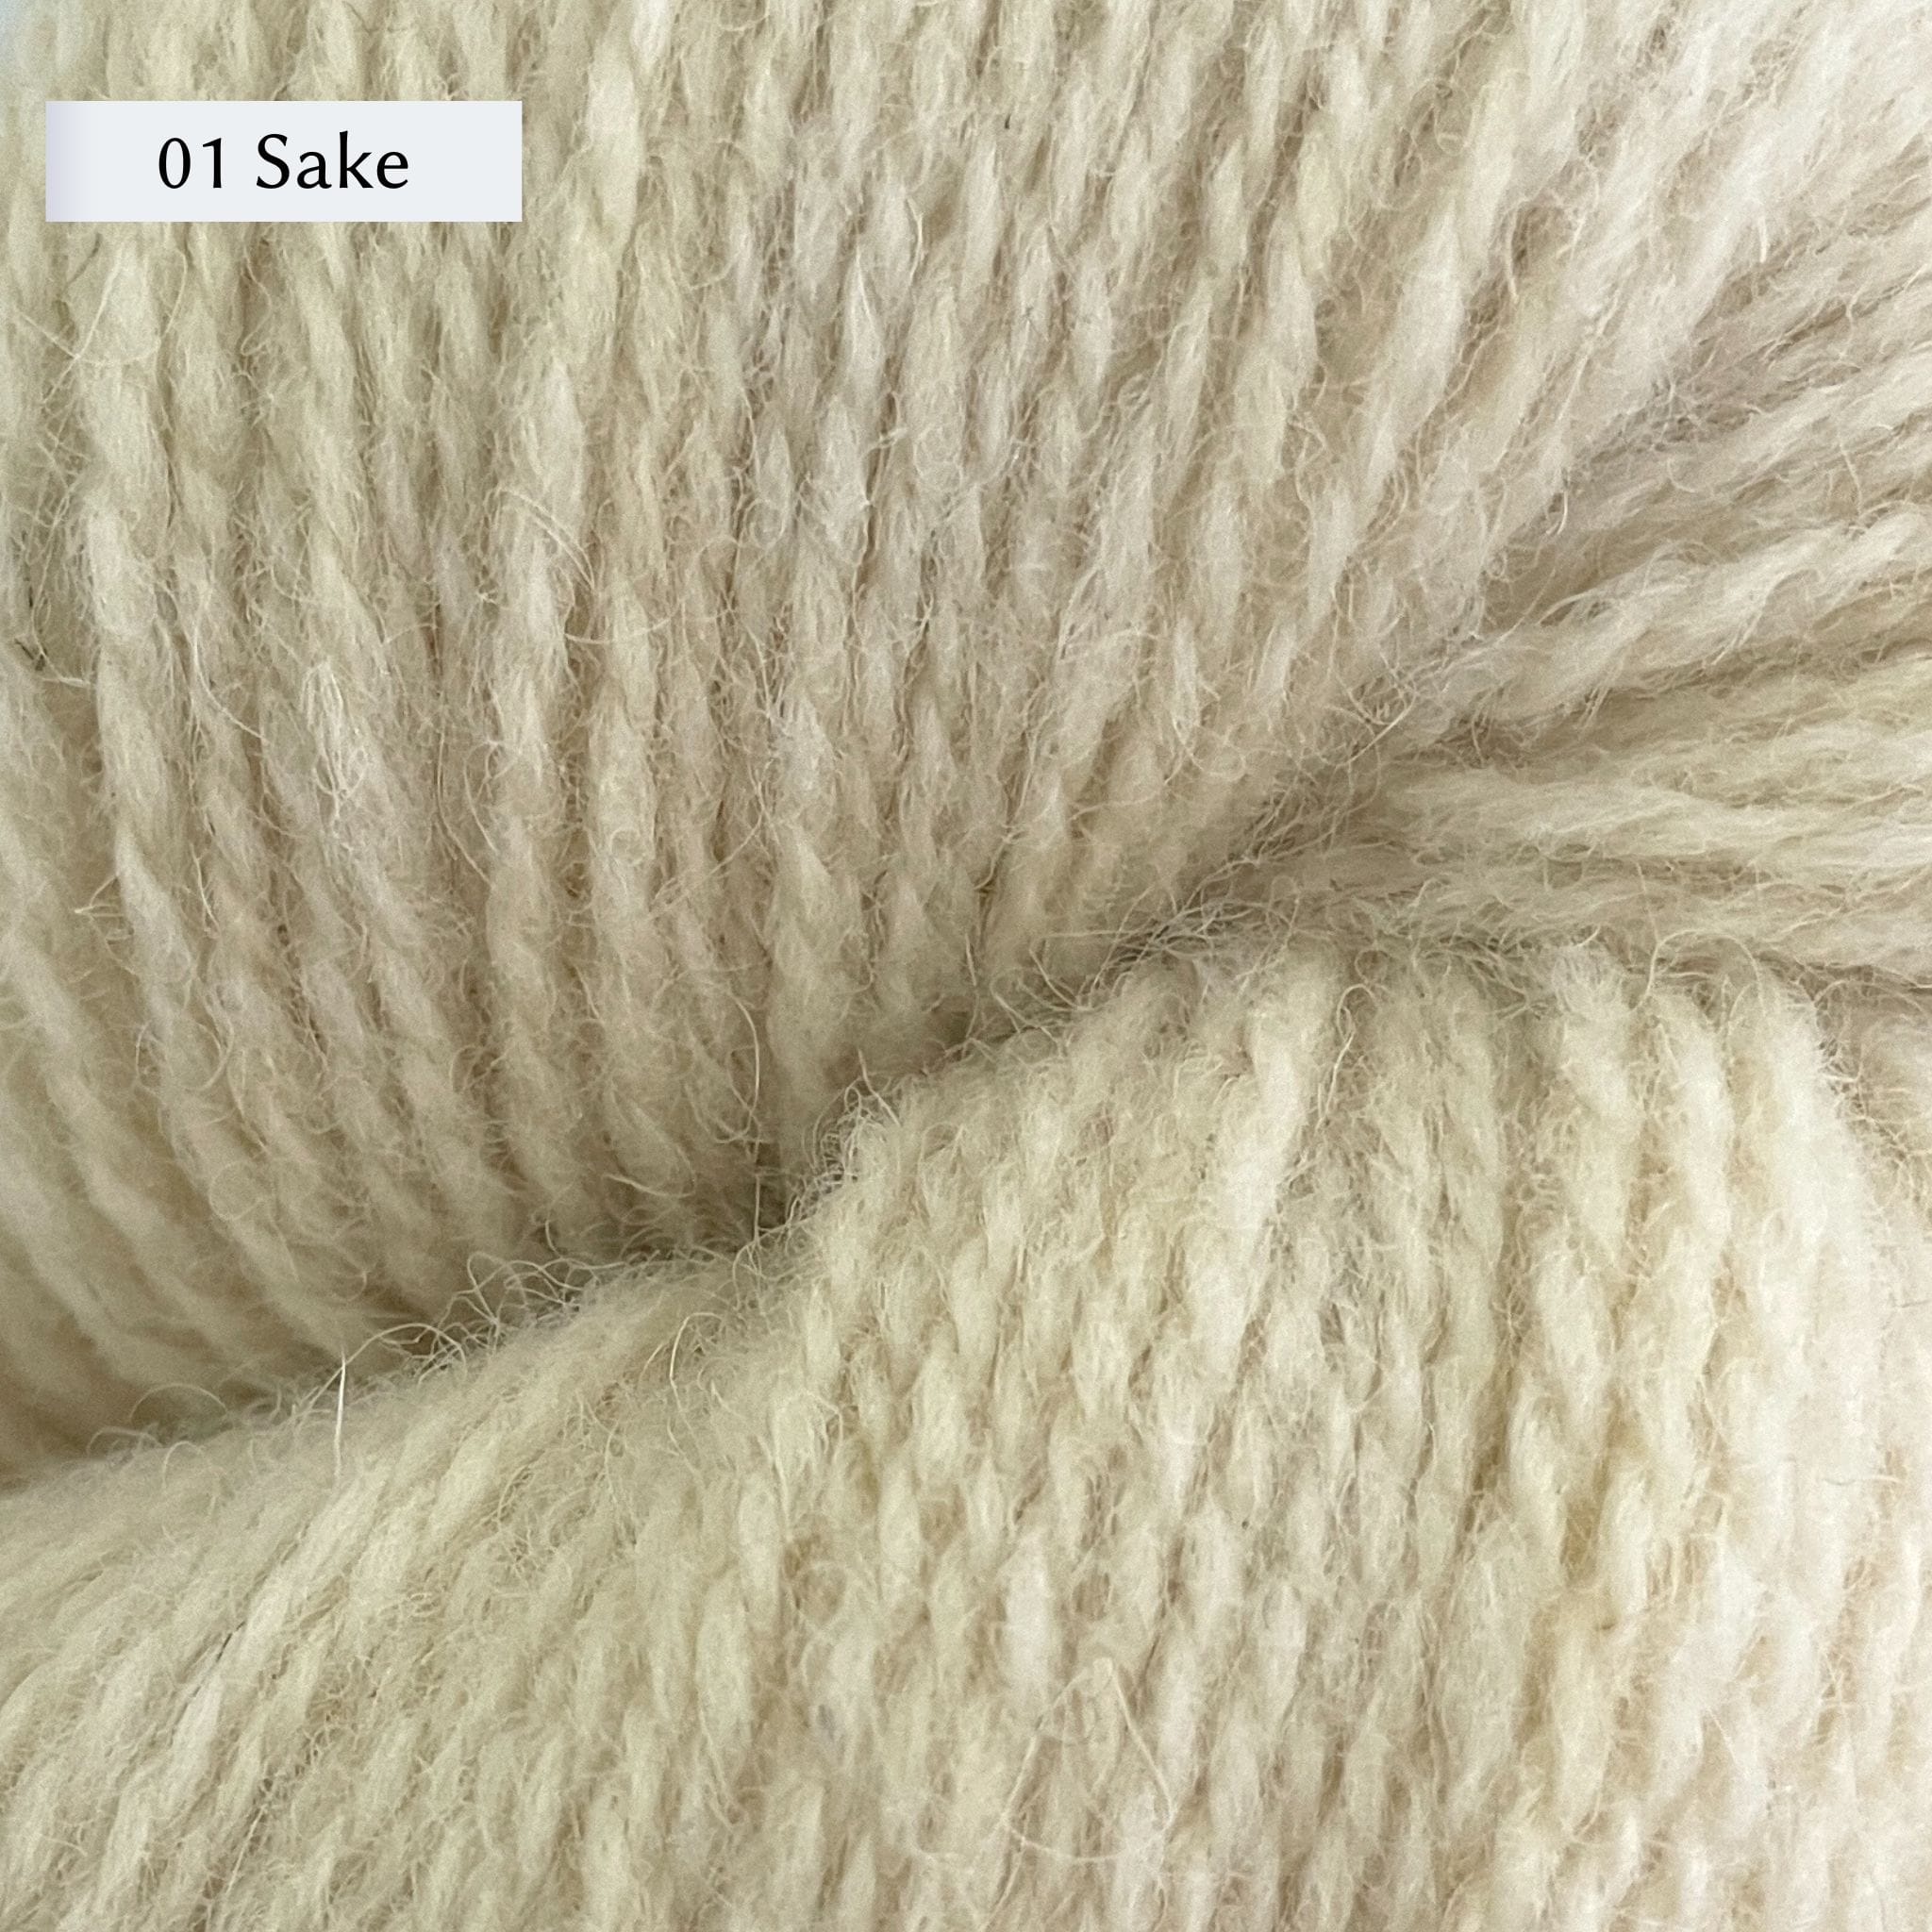 Tukuwool DK Yarn, 100% Finnish Wool shown in colorway 01 Sake which is a cream color. 